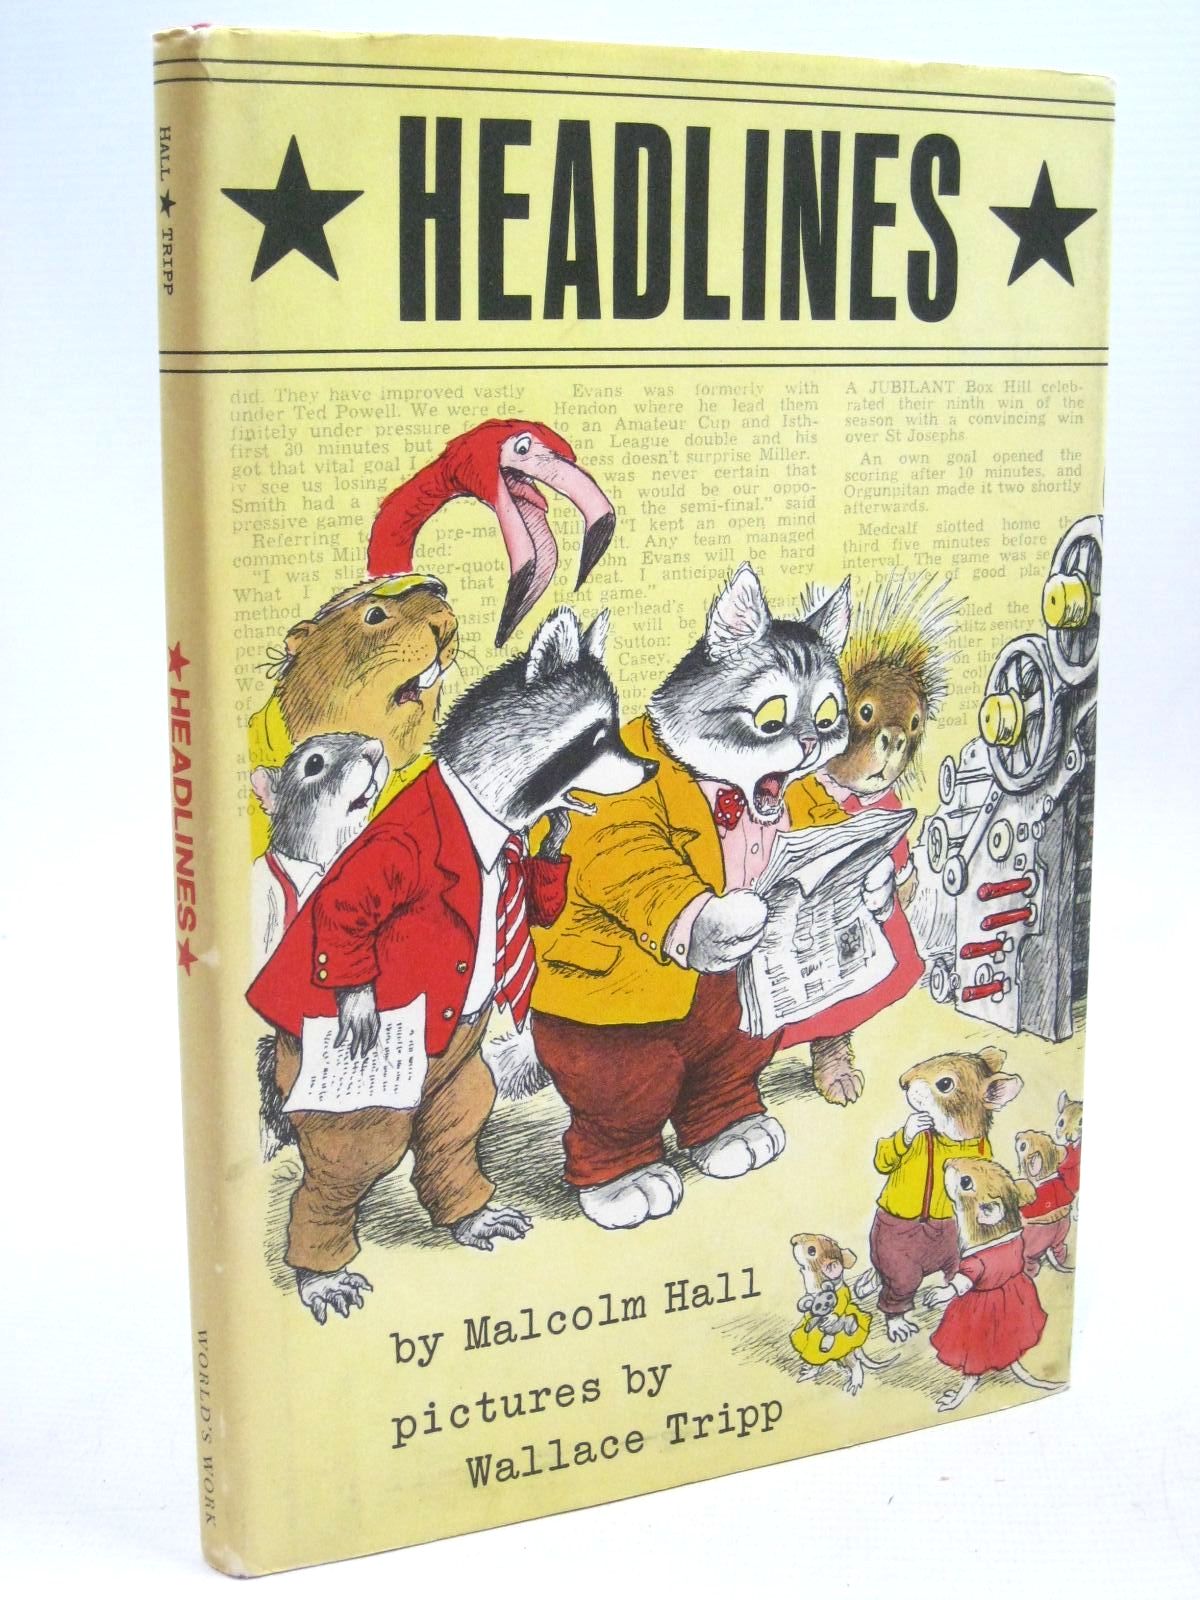 Cover of HEADLINES by Malcolm Hall